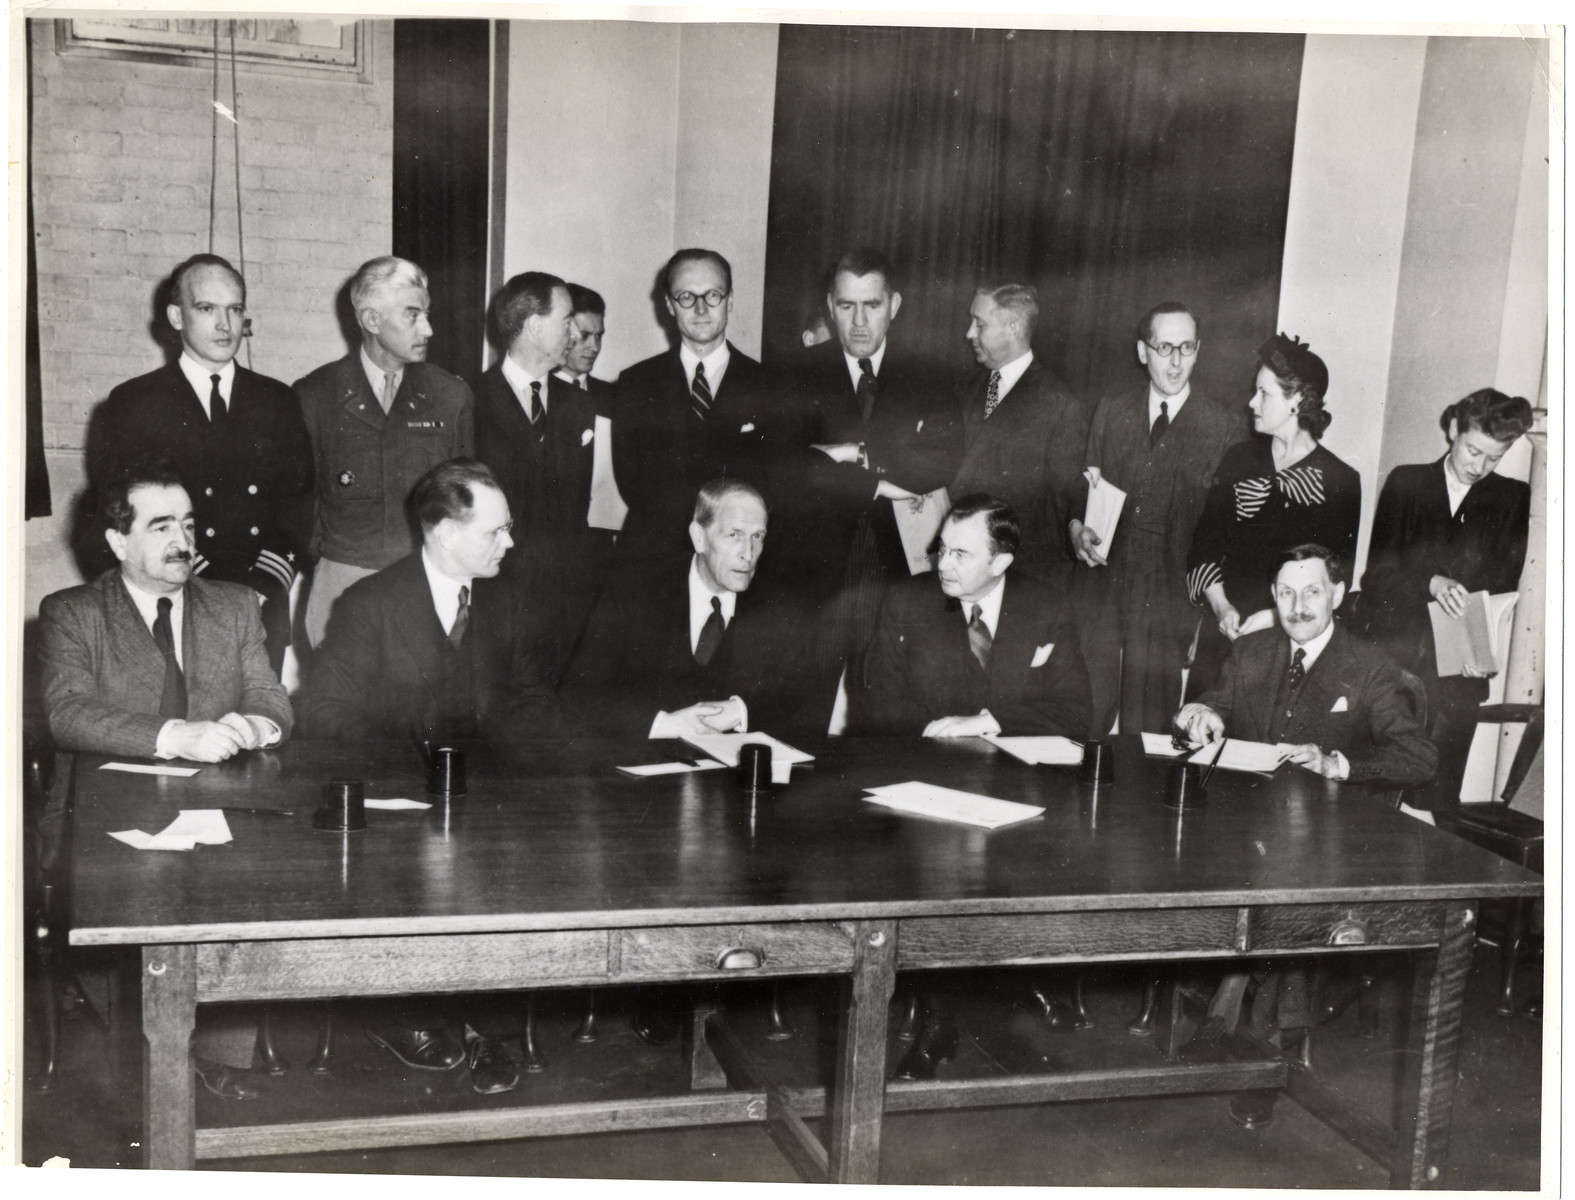 The members of the War Crimes Executive Committee at the signing of the agreement to create the International Military Tribunal to prosecute German war criminals.  

Among those pictured are Major General I.T. Nikitchenko (second from the left) who will represent the U.S.S.R. on the Tribunal, Justice Robert Jackson (second from the right) who will be the chief U.S. prosecutor, and Robert Falco (right), who will be the alternate French member of the Tribunal.